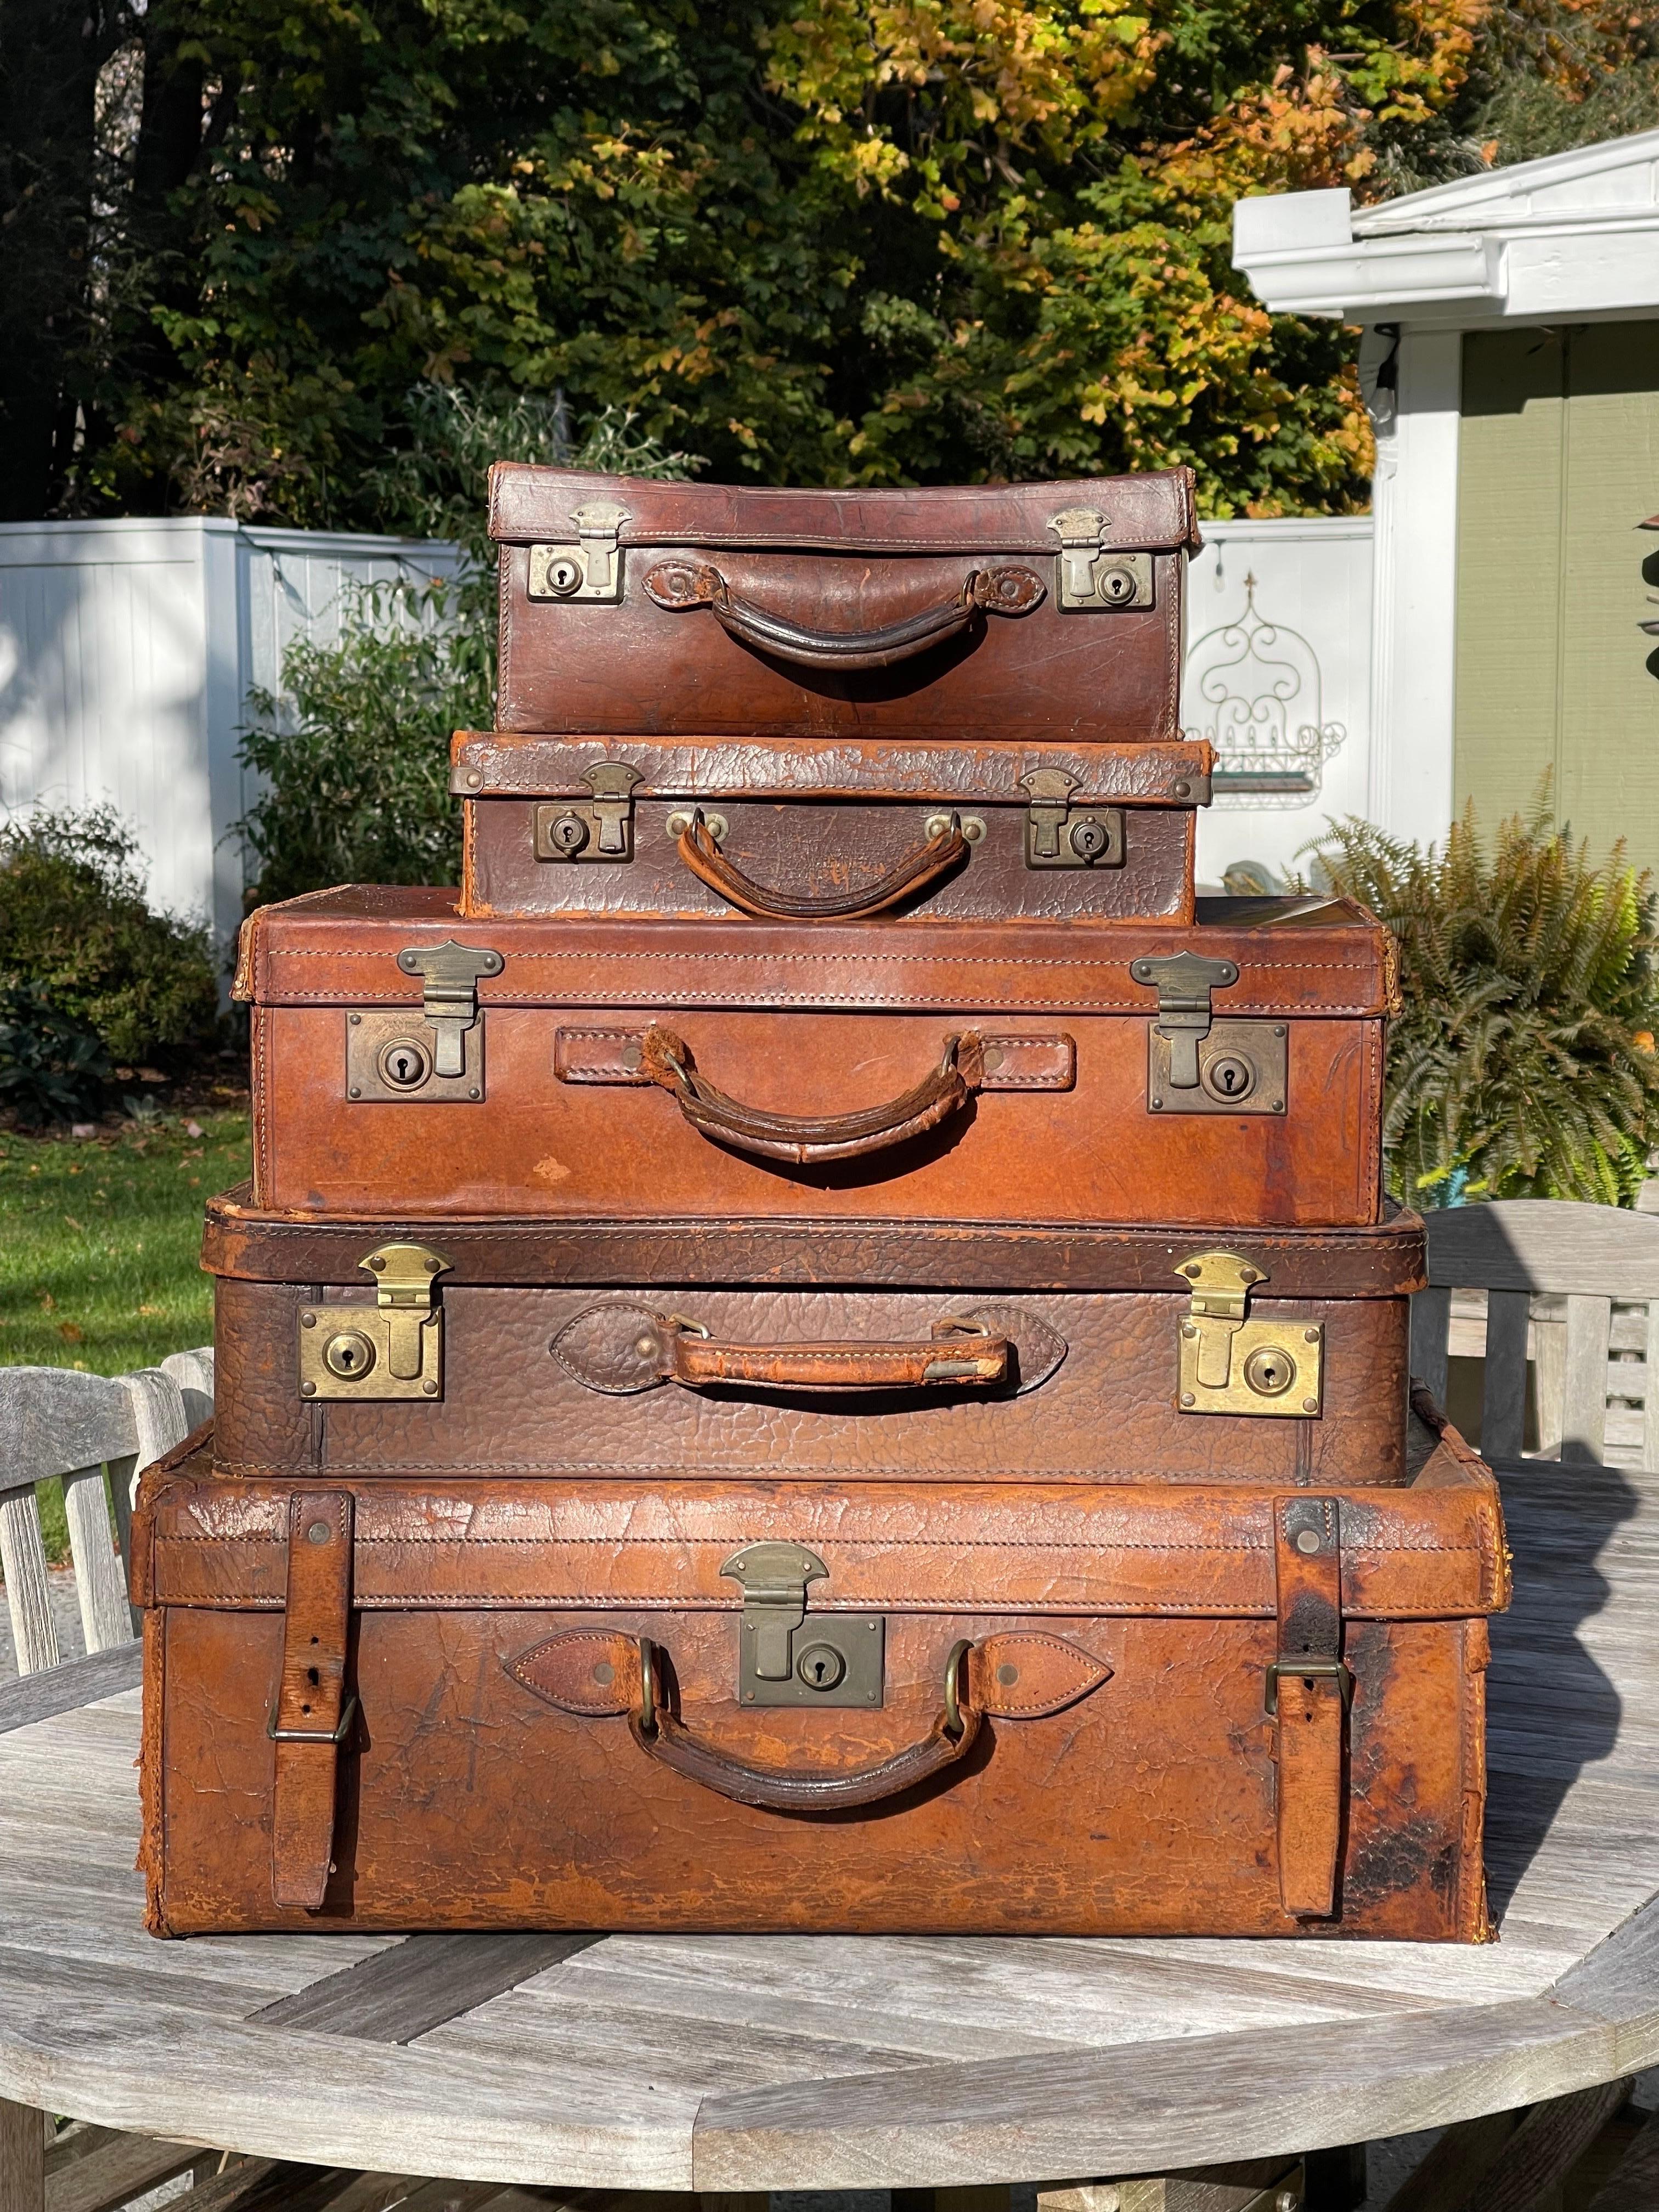 Stacked Set of 5 Antique Leather Suitcases or Trunks. If these suitcases could talk. The stories they would tell. Well worn and loved these leather suitcases have rich patina and history. 
Use as a decorative accent in a guest room or use as a side